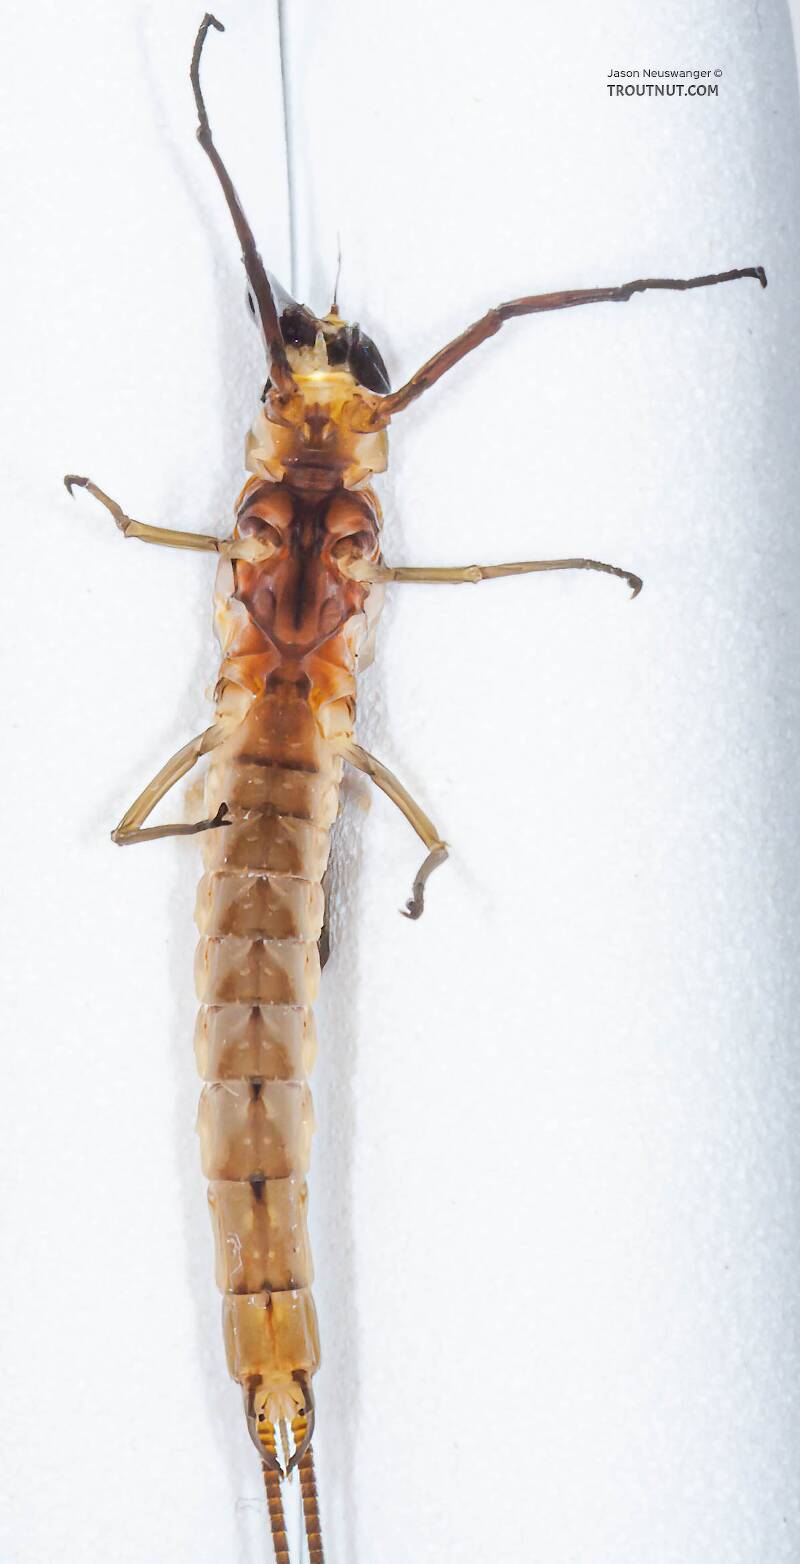 Ventral view of a Male Hexagenia limbata (Ephemeridae) (Hex) Mayfly Dun from the White River in Wisconsin